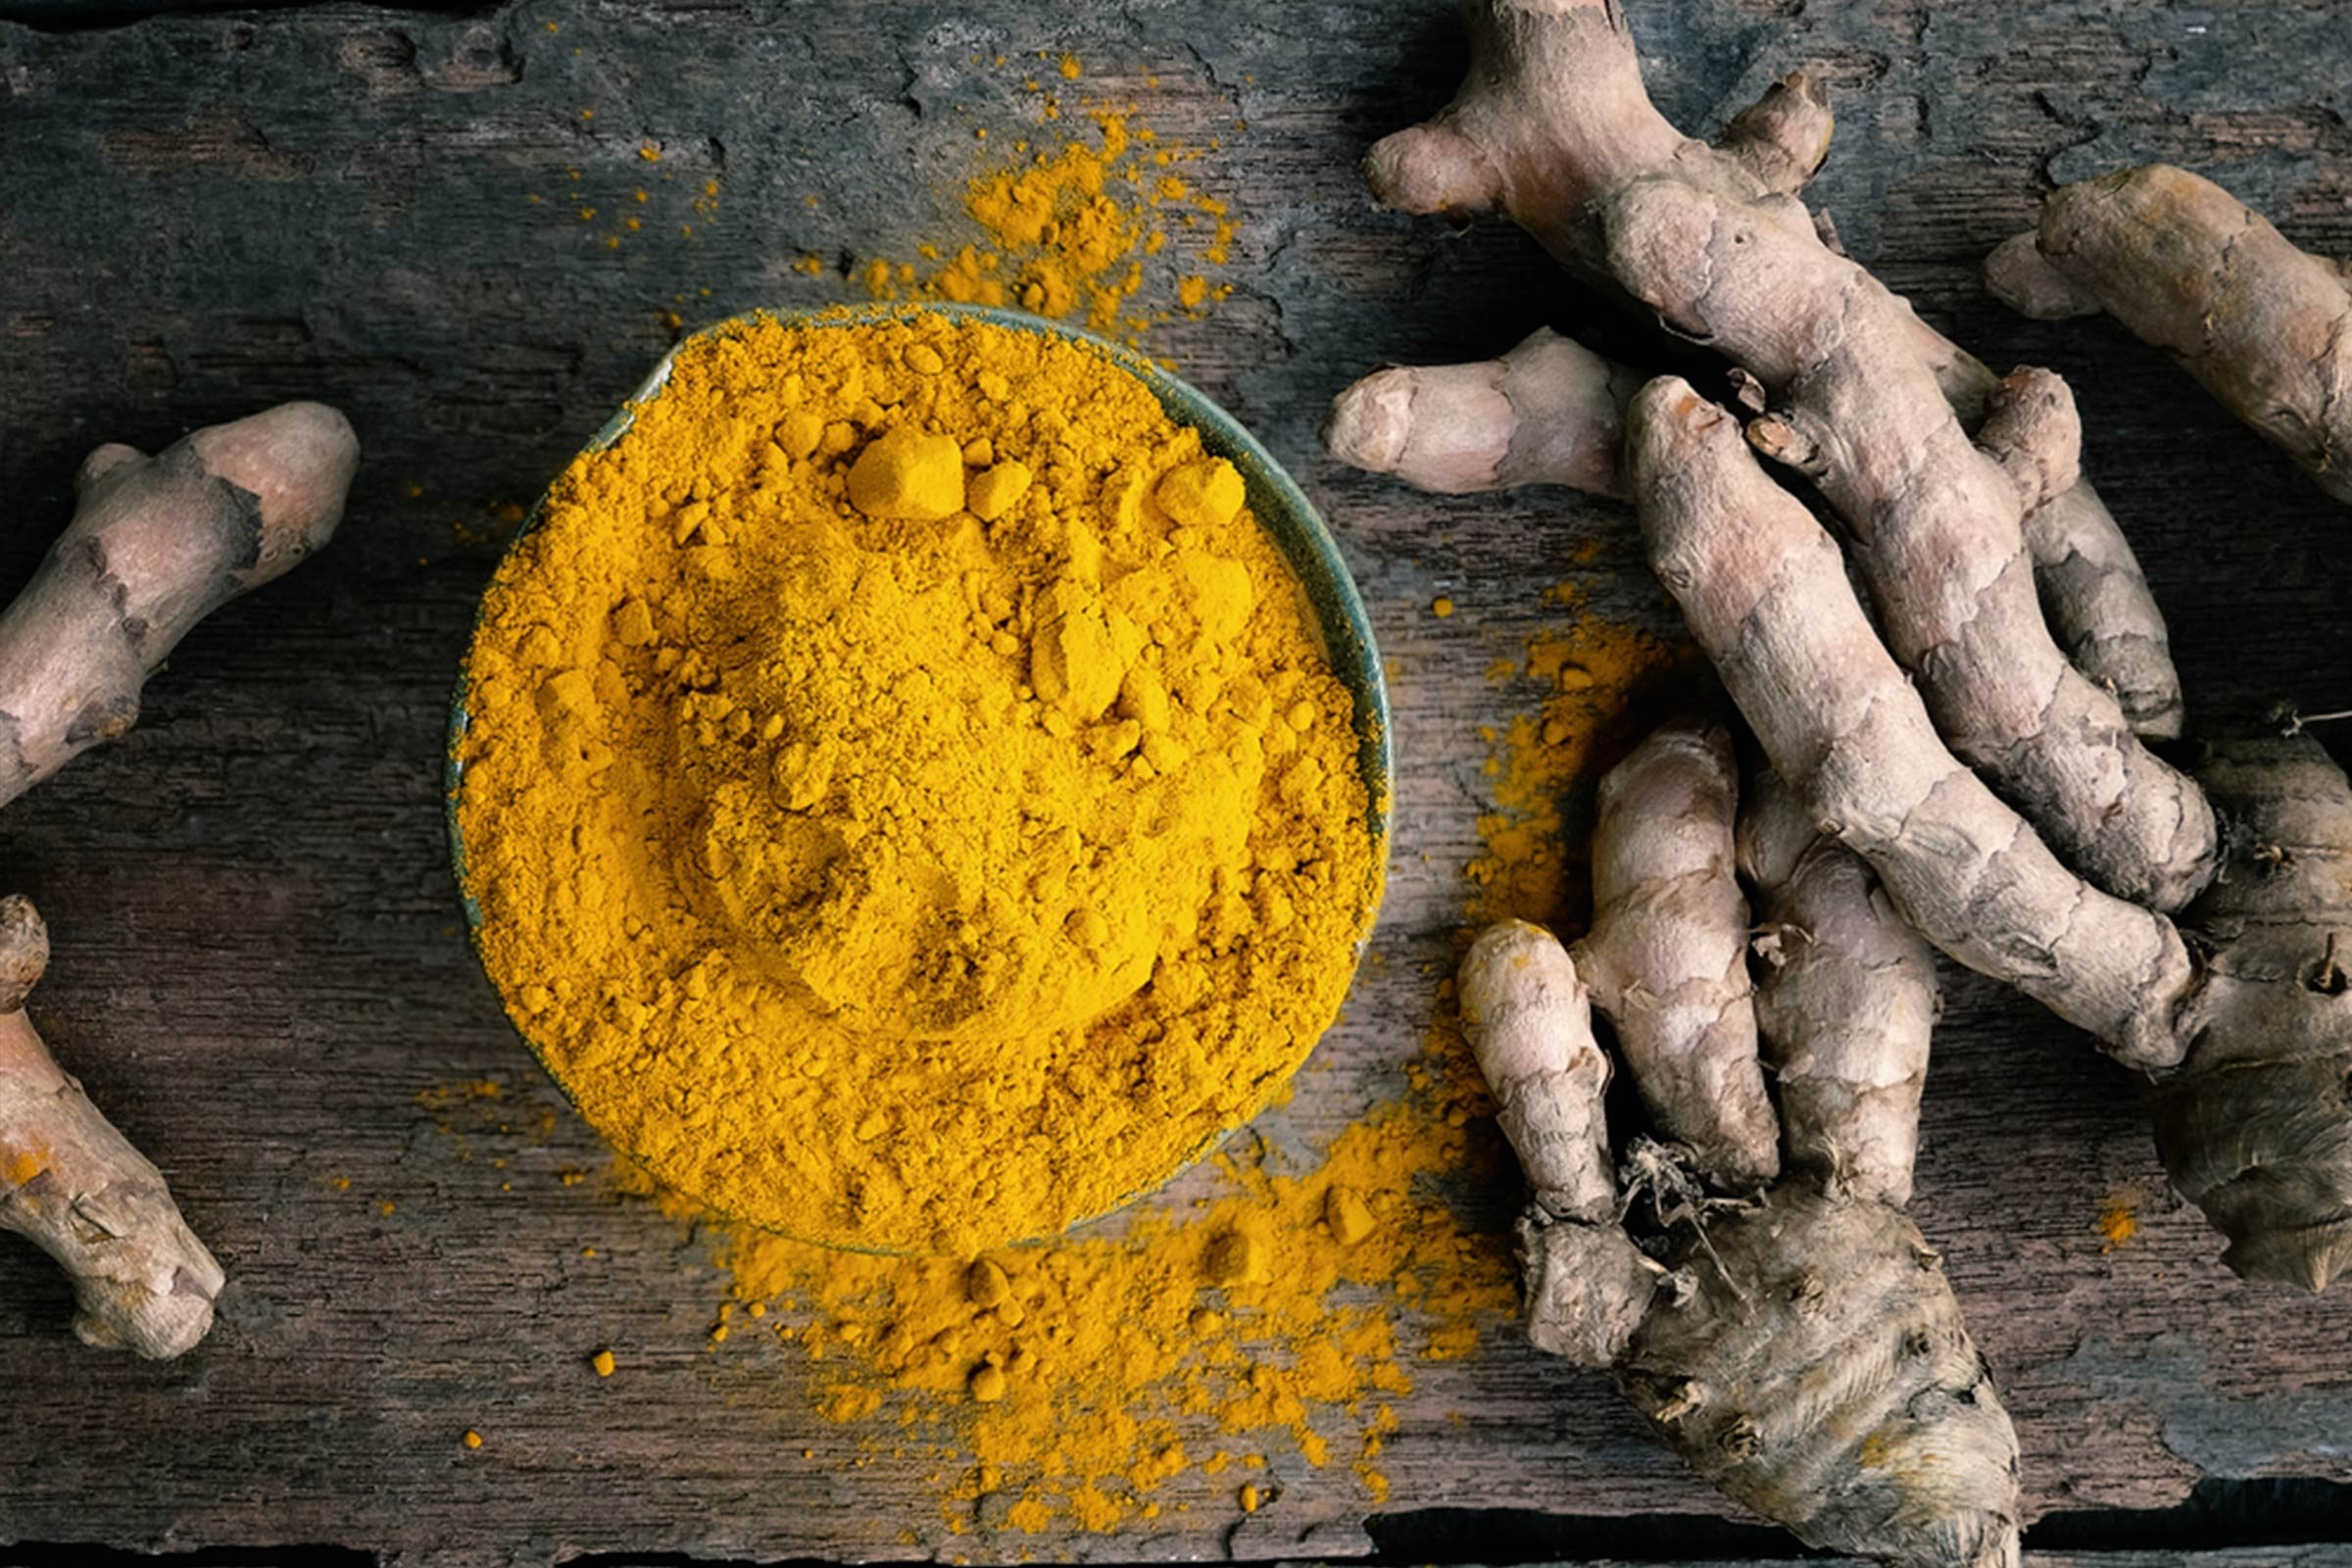 How Much Turmeric You Need to Reduce Inflammation